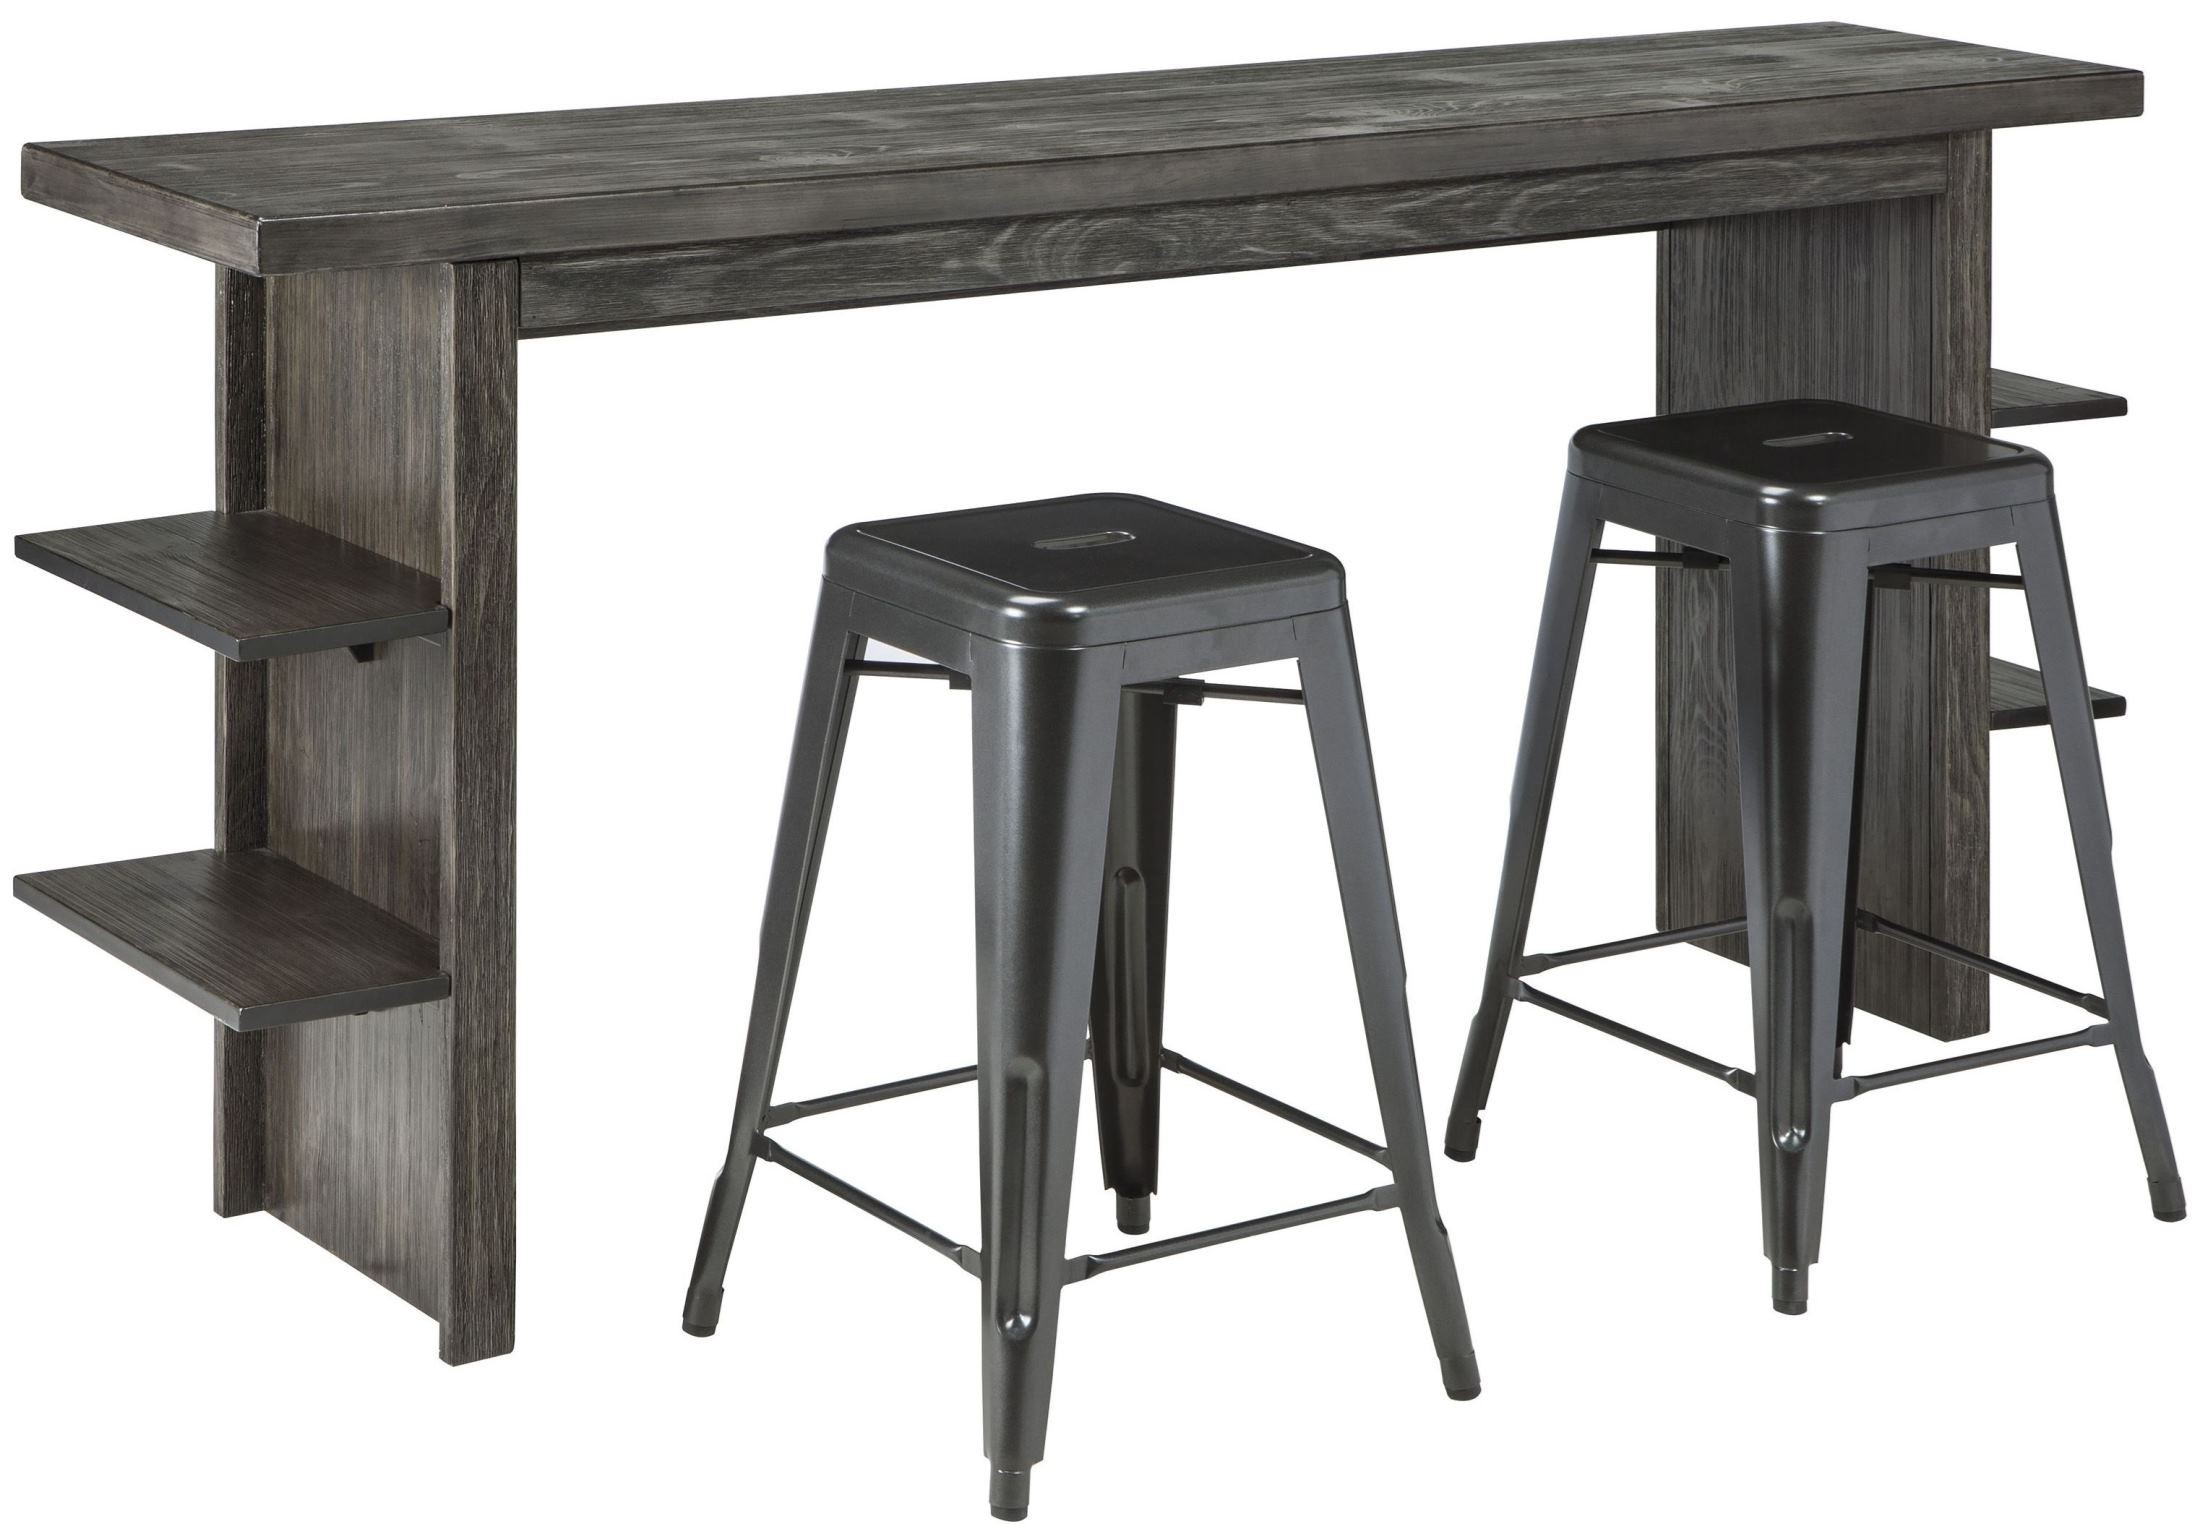 Lamoille dark gray long counter height dining table from